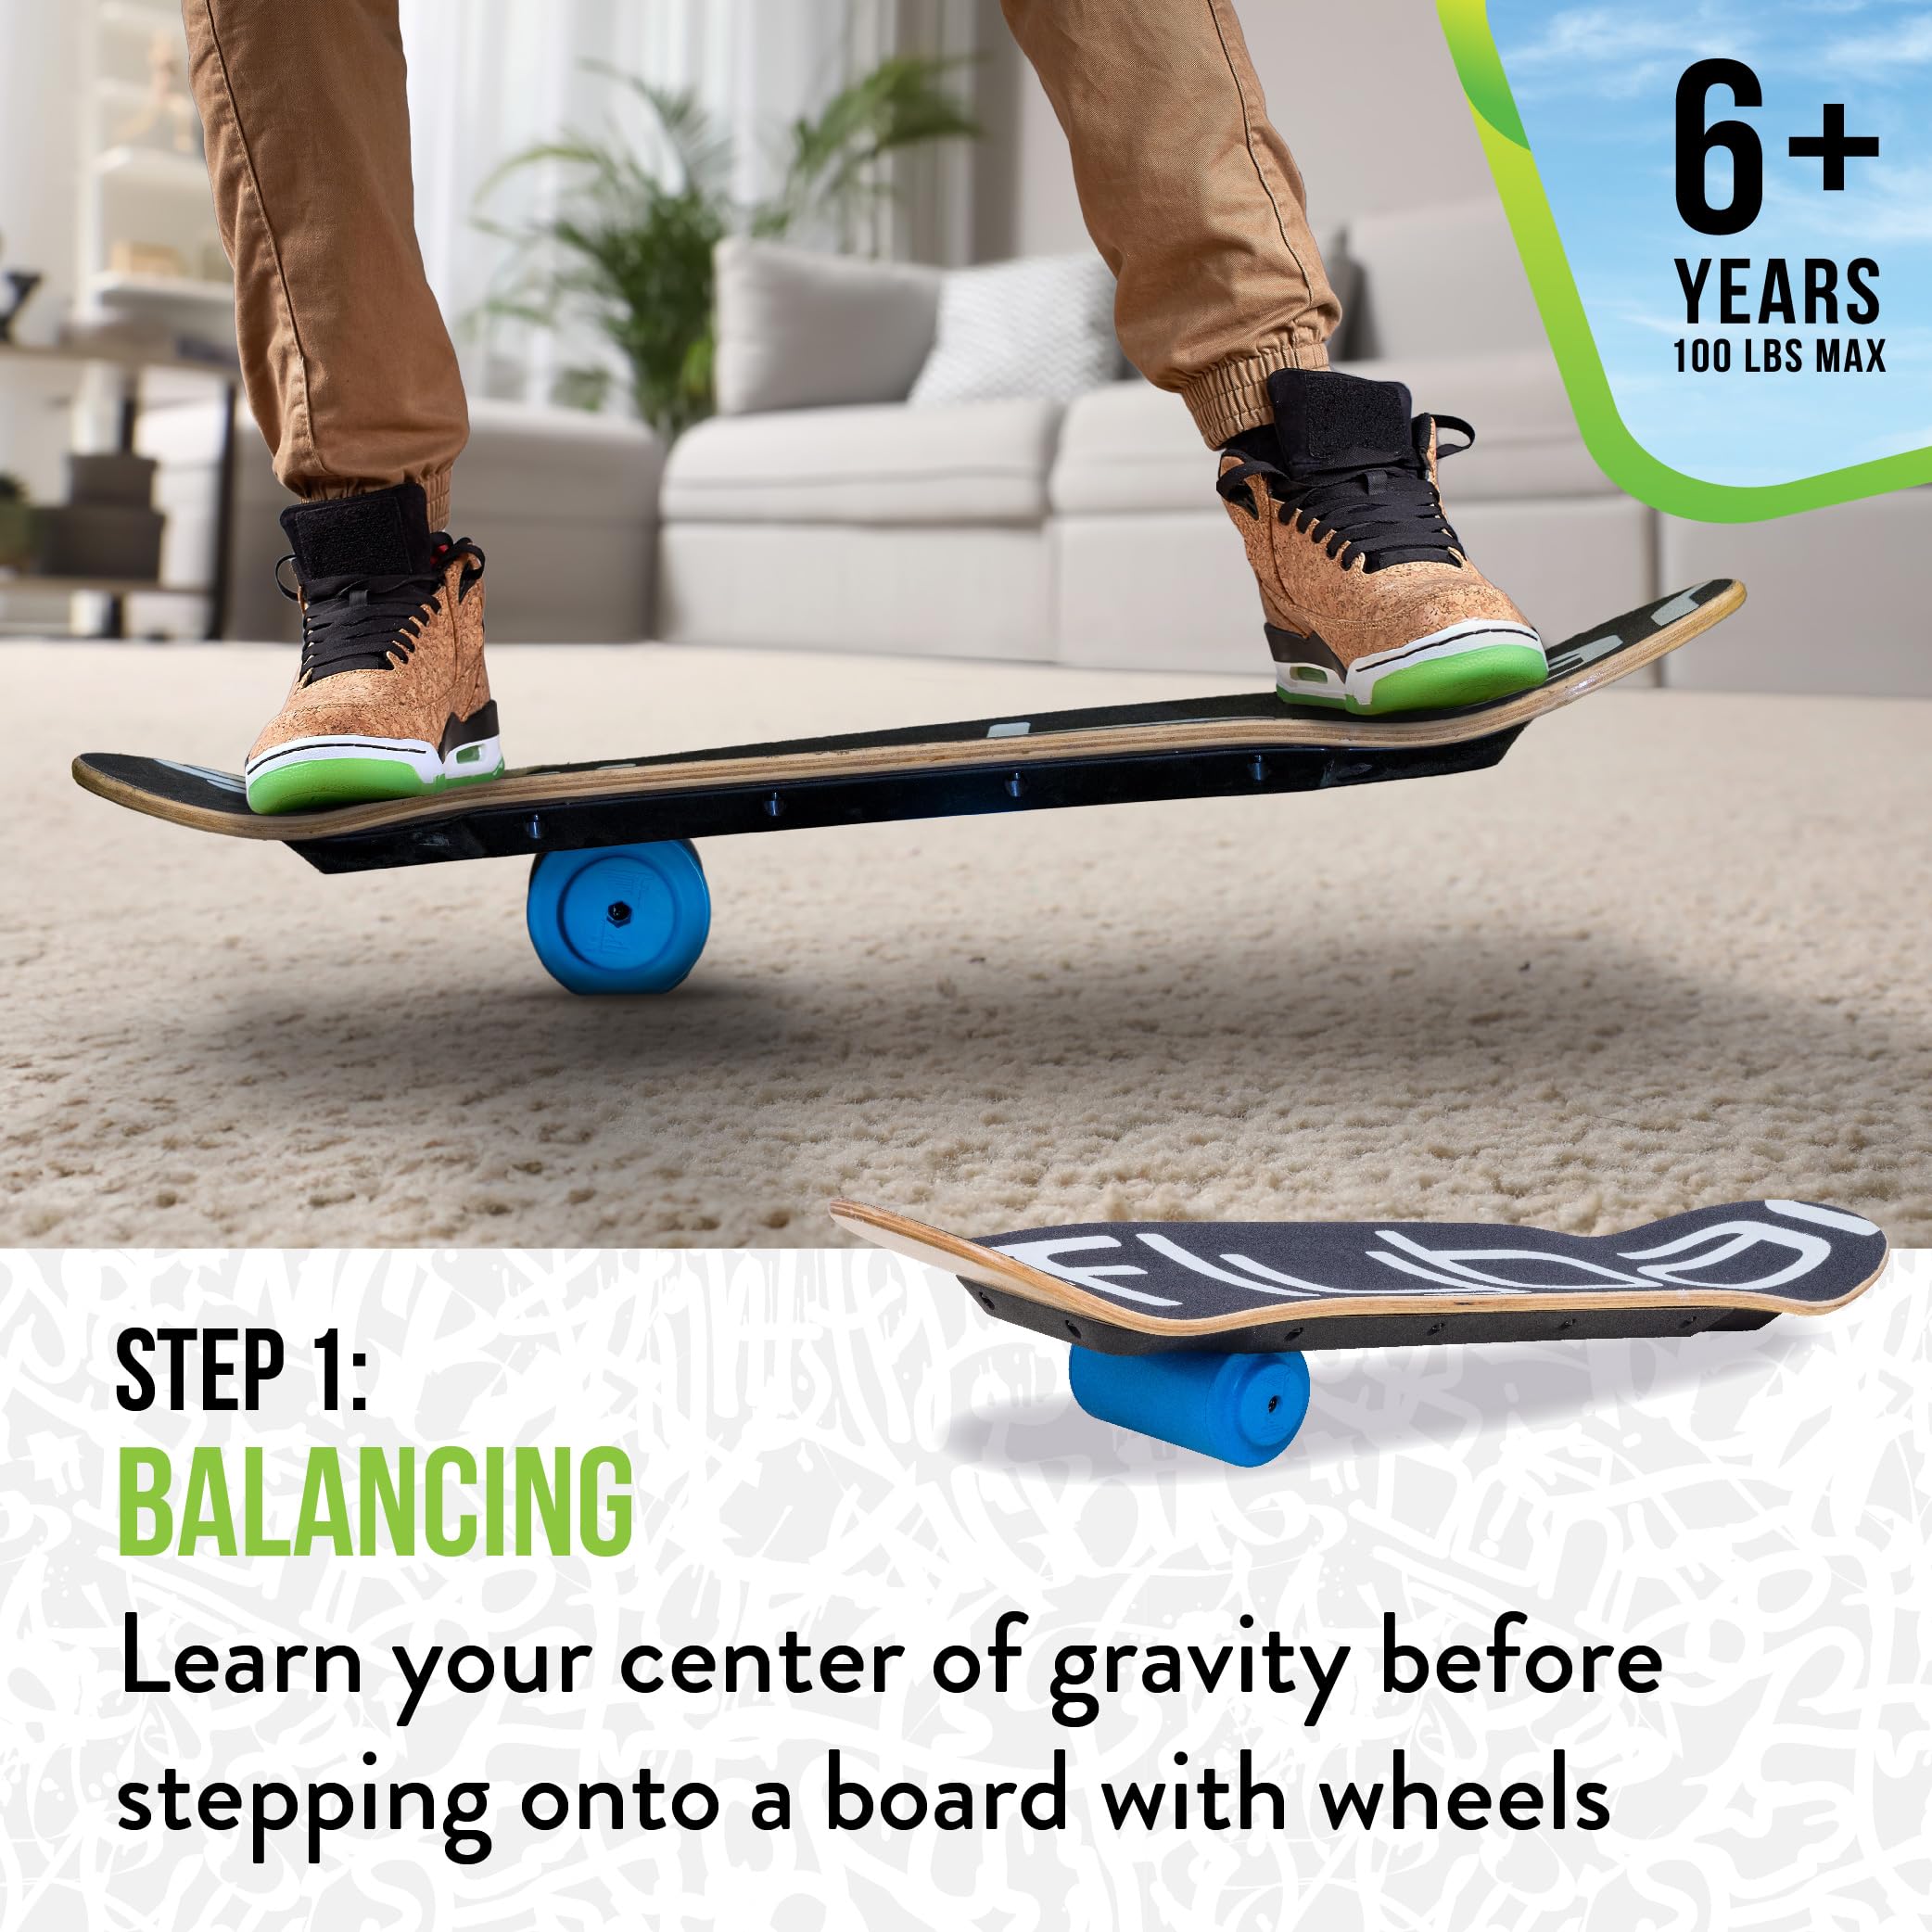 Flybar 3 in-1 Learn to Skate – Complete Skateboard for Beginners, Balance Board, Skateboard Accessories, Learn Skate Tricks Fast and Easy, Ollies, Backflips, Durable, Boys, Girls, Ages 6+, 100 lbs